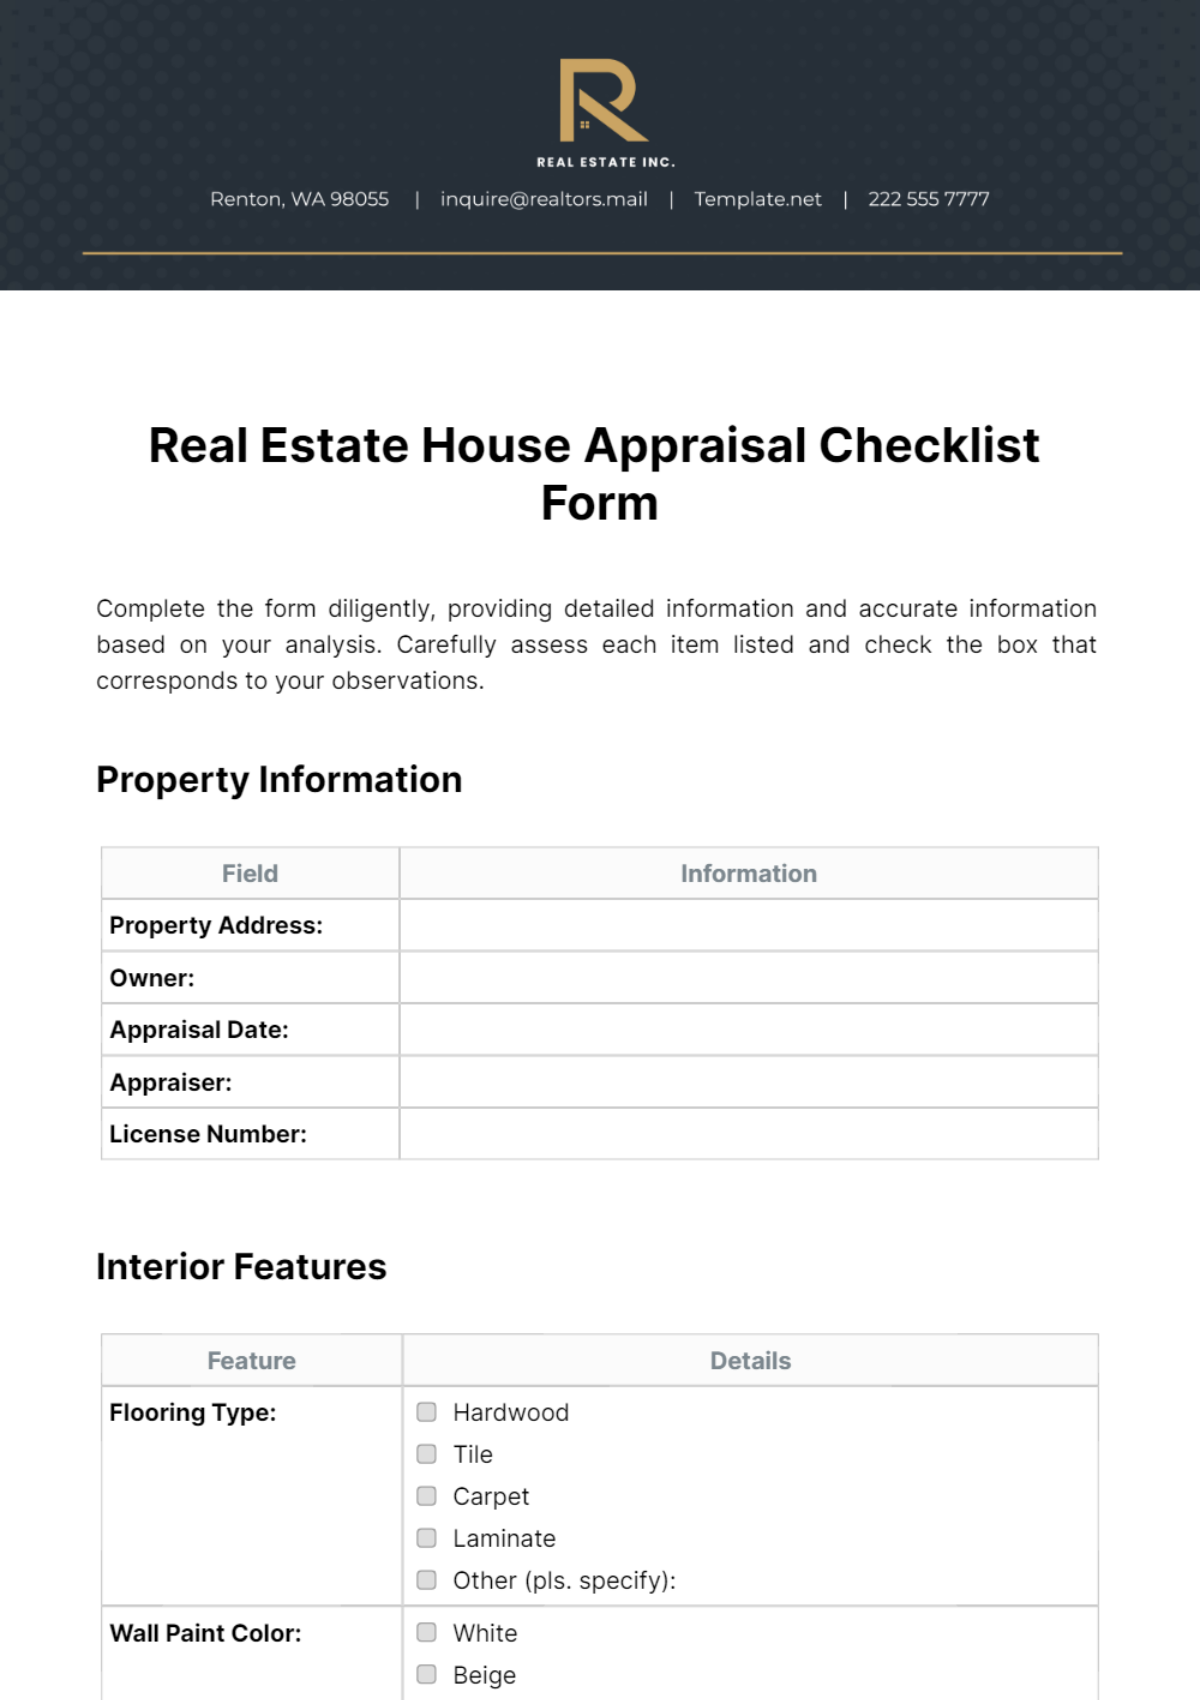 Free Real Estate House Appraisal Checklist Form Template